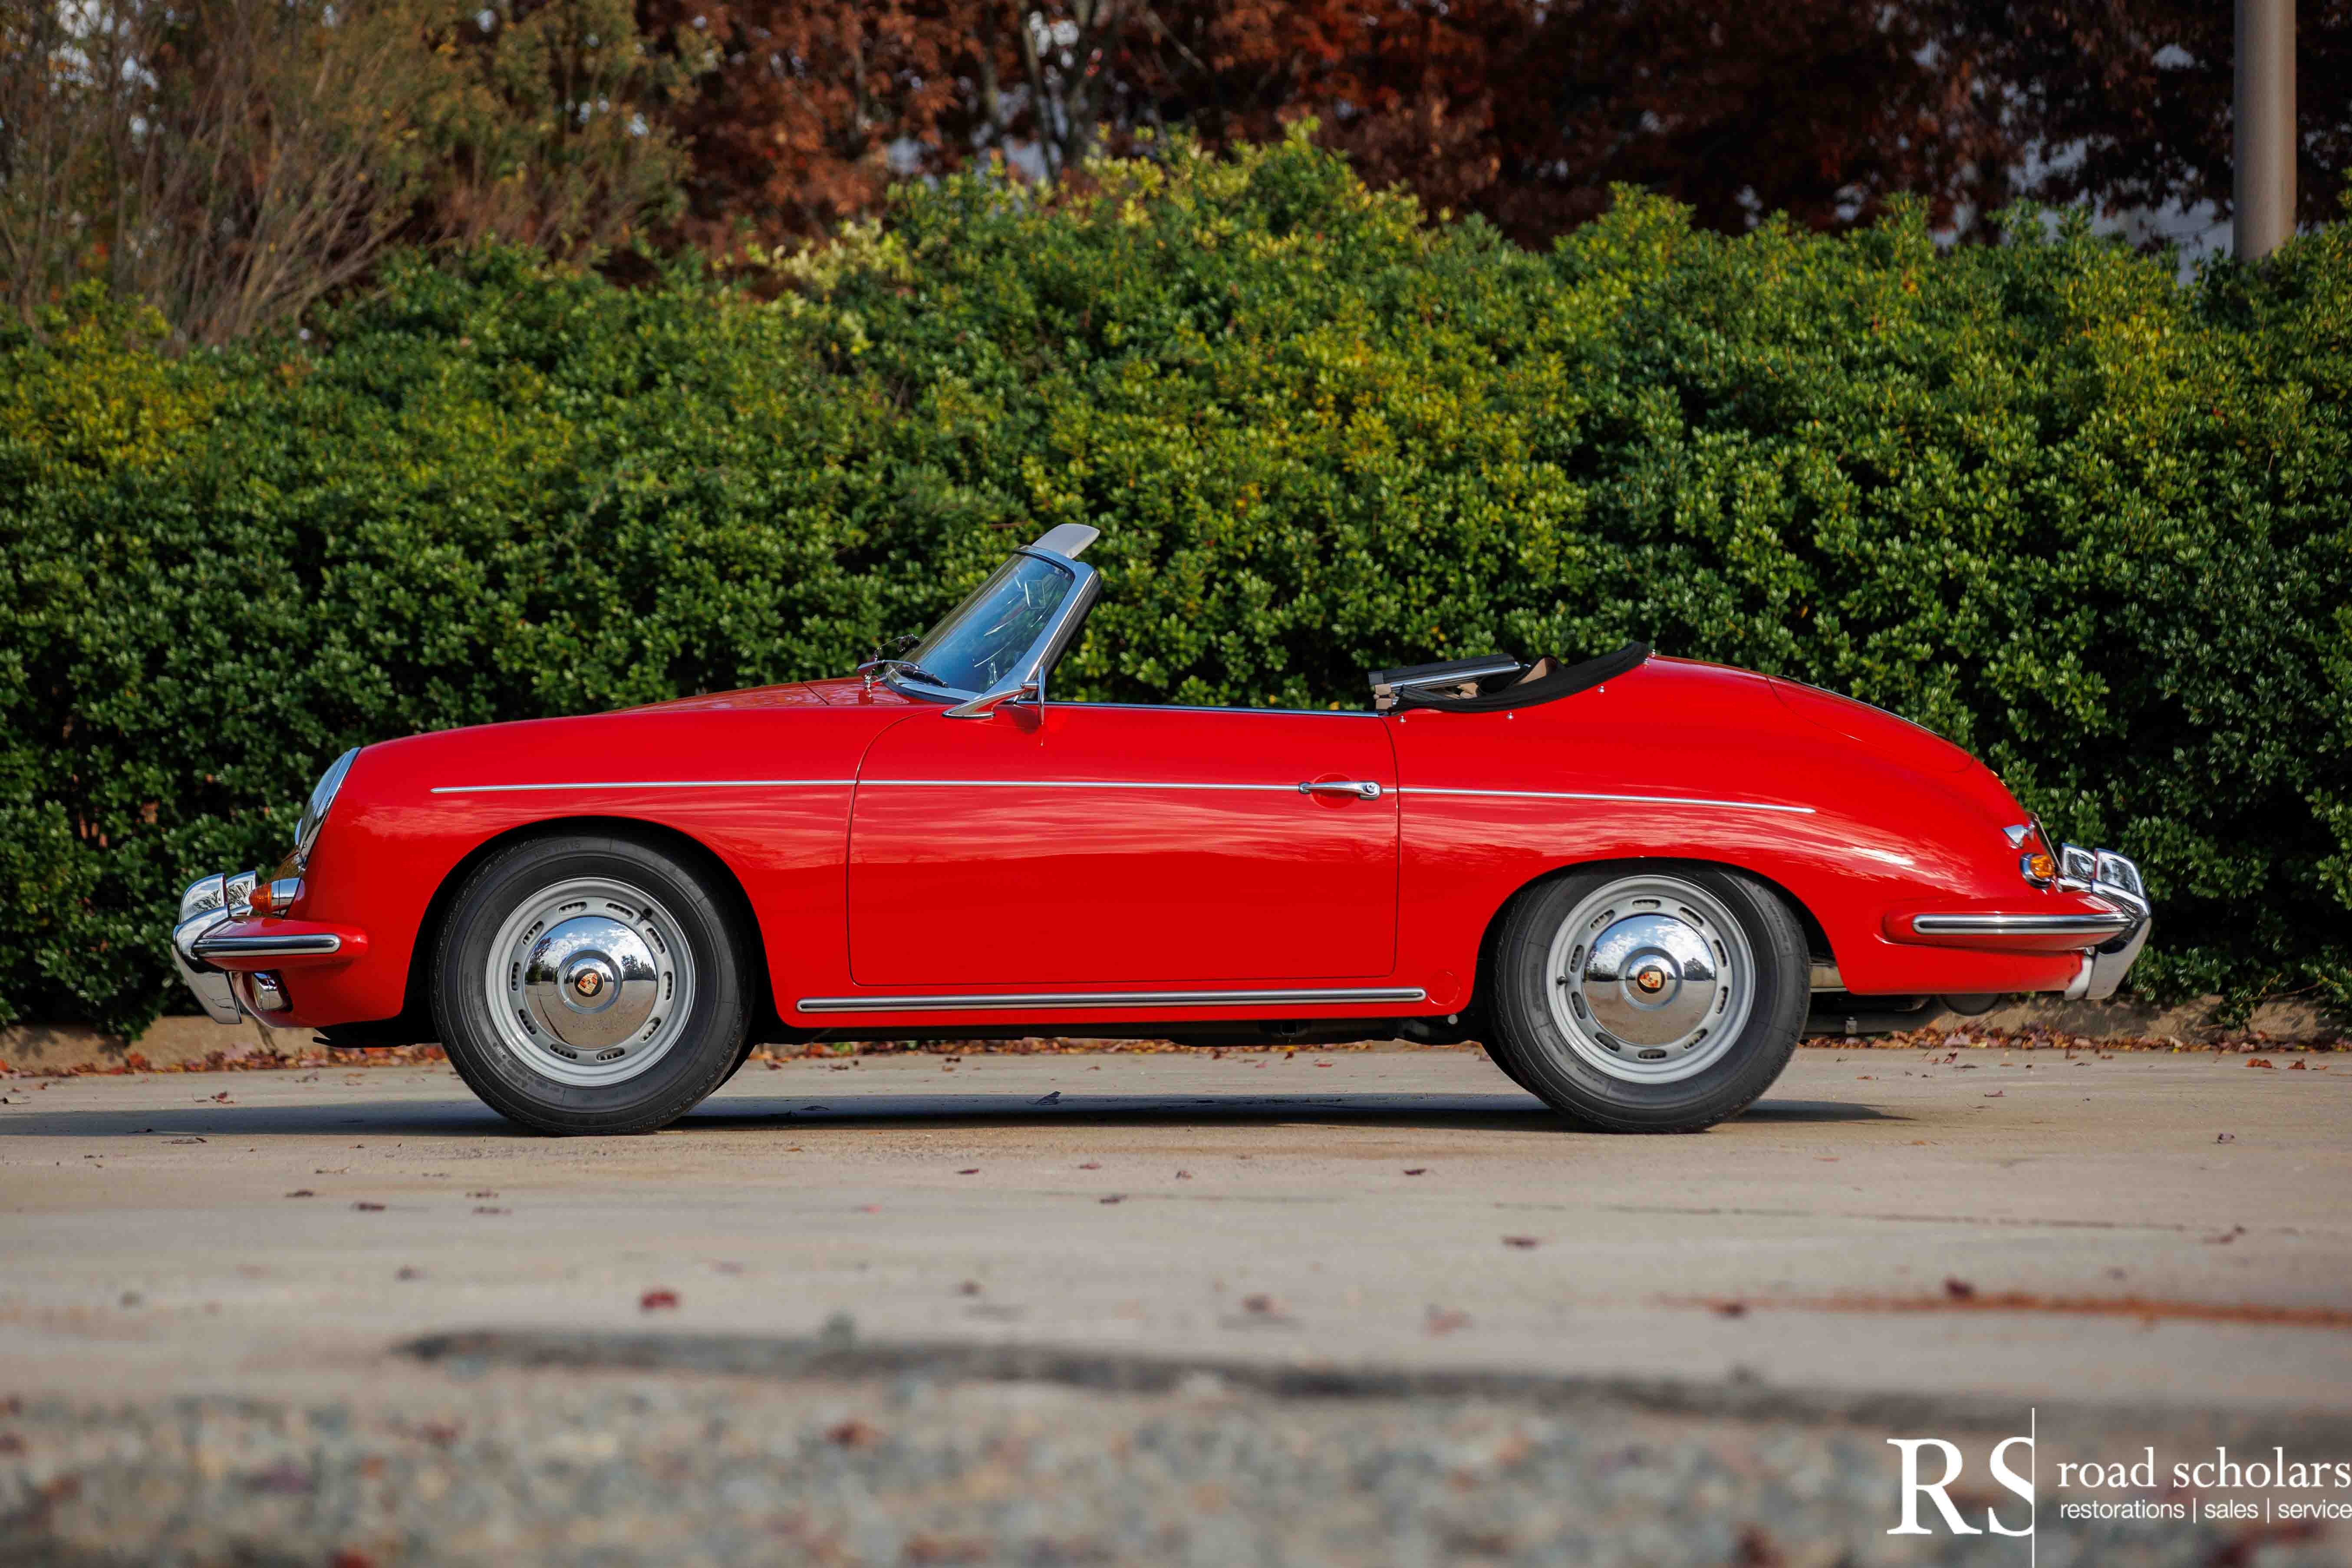 1961 Porsche 356B Super 90 (T5) Roadster chassis 89305 (watermarked)-66